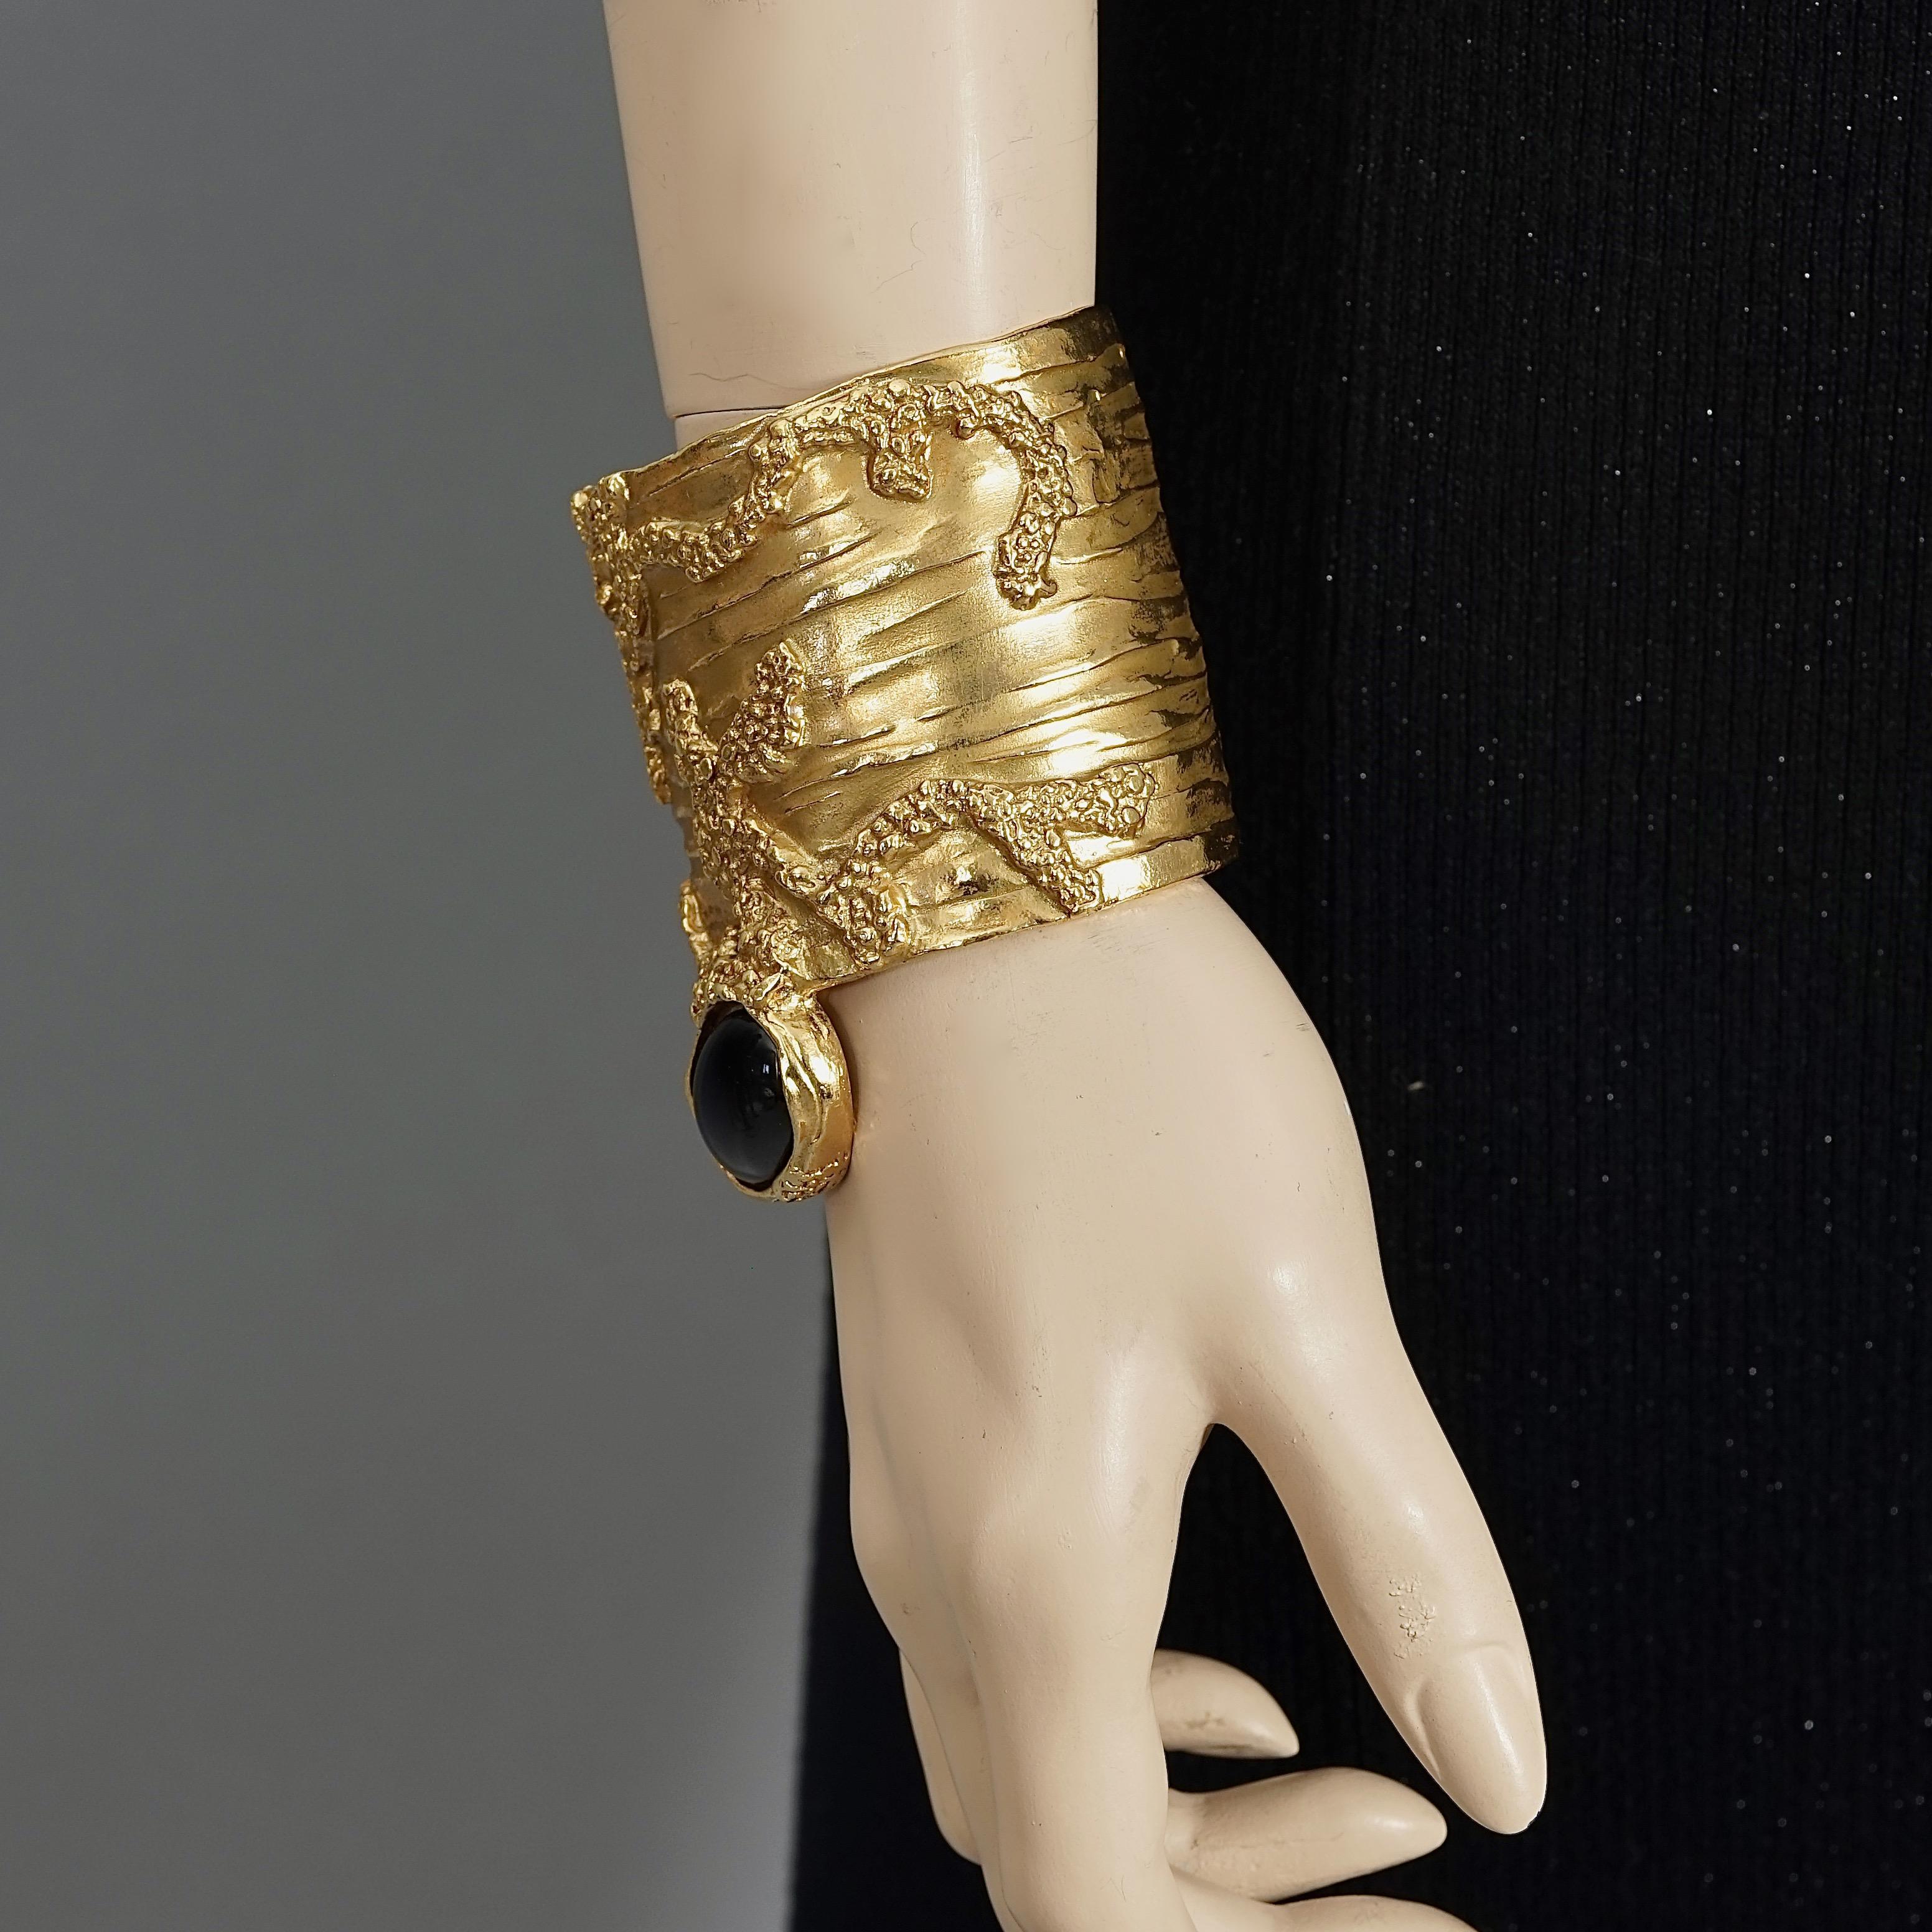 Yves Saint Laurent YSL Arty Black Cabochon Textured Wide Cuff Bracelet

Measurements:
Height: 3.15 inches (8 cm)
Inside Circumference: 6.89 inches (17.5 cm) 

Features:
- 100% Authentic YVES SAINT LAURENT from the Arty Collection.
- Wide textured